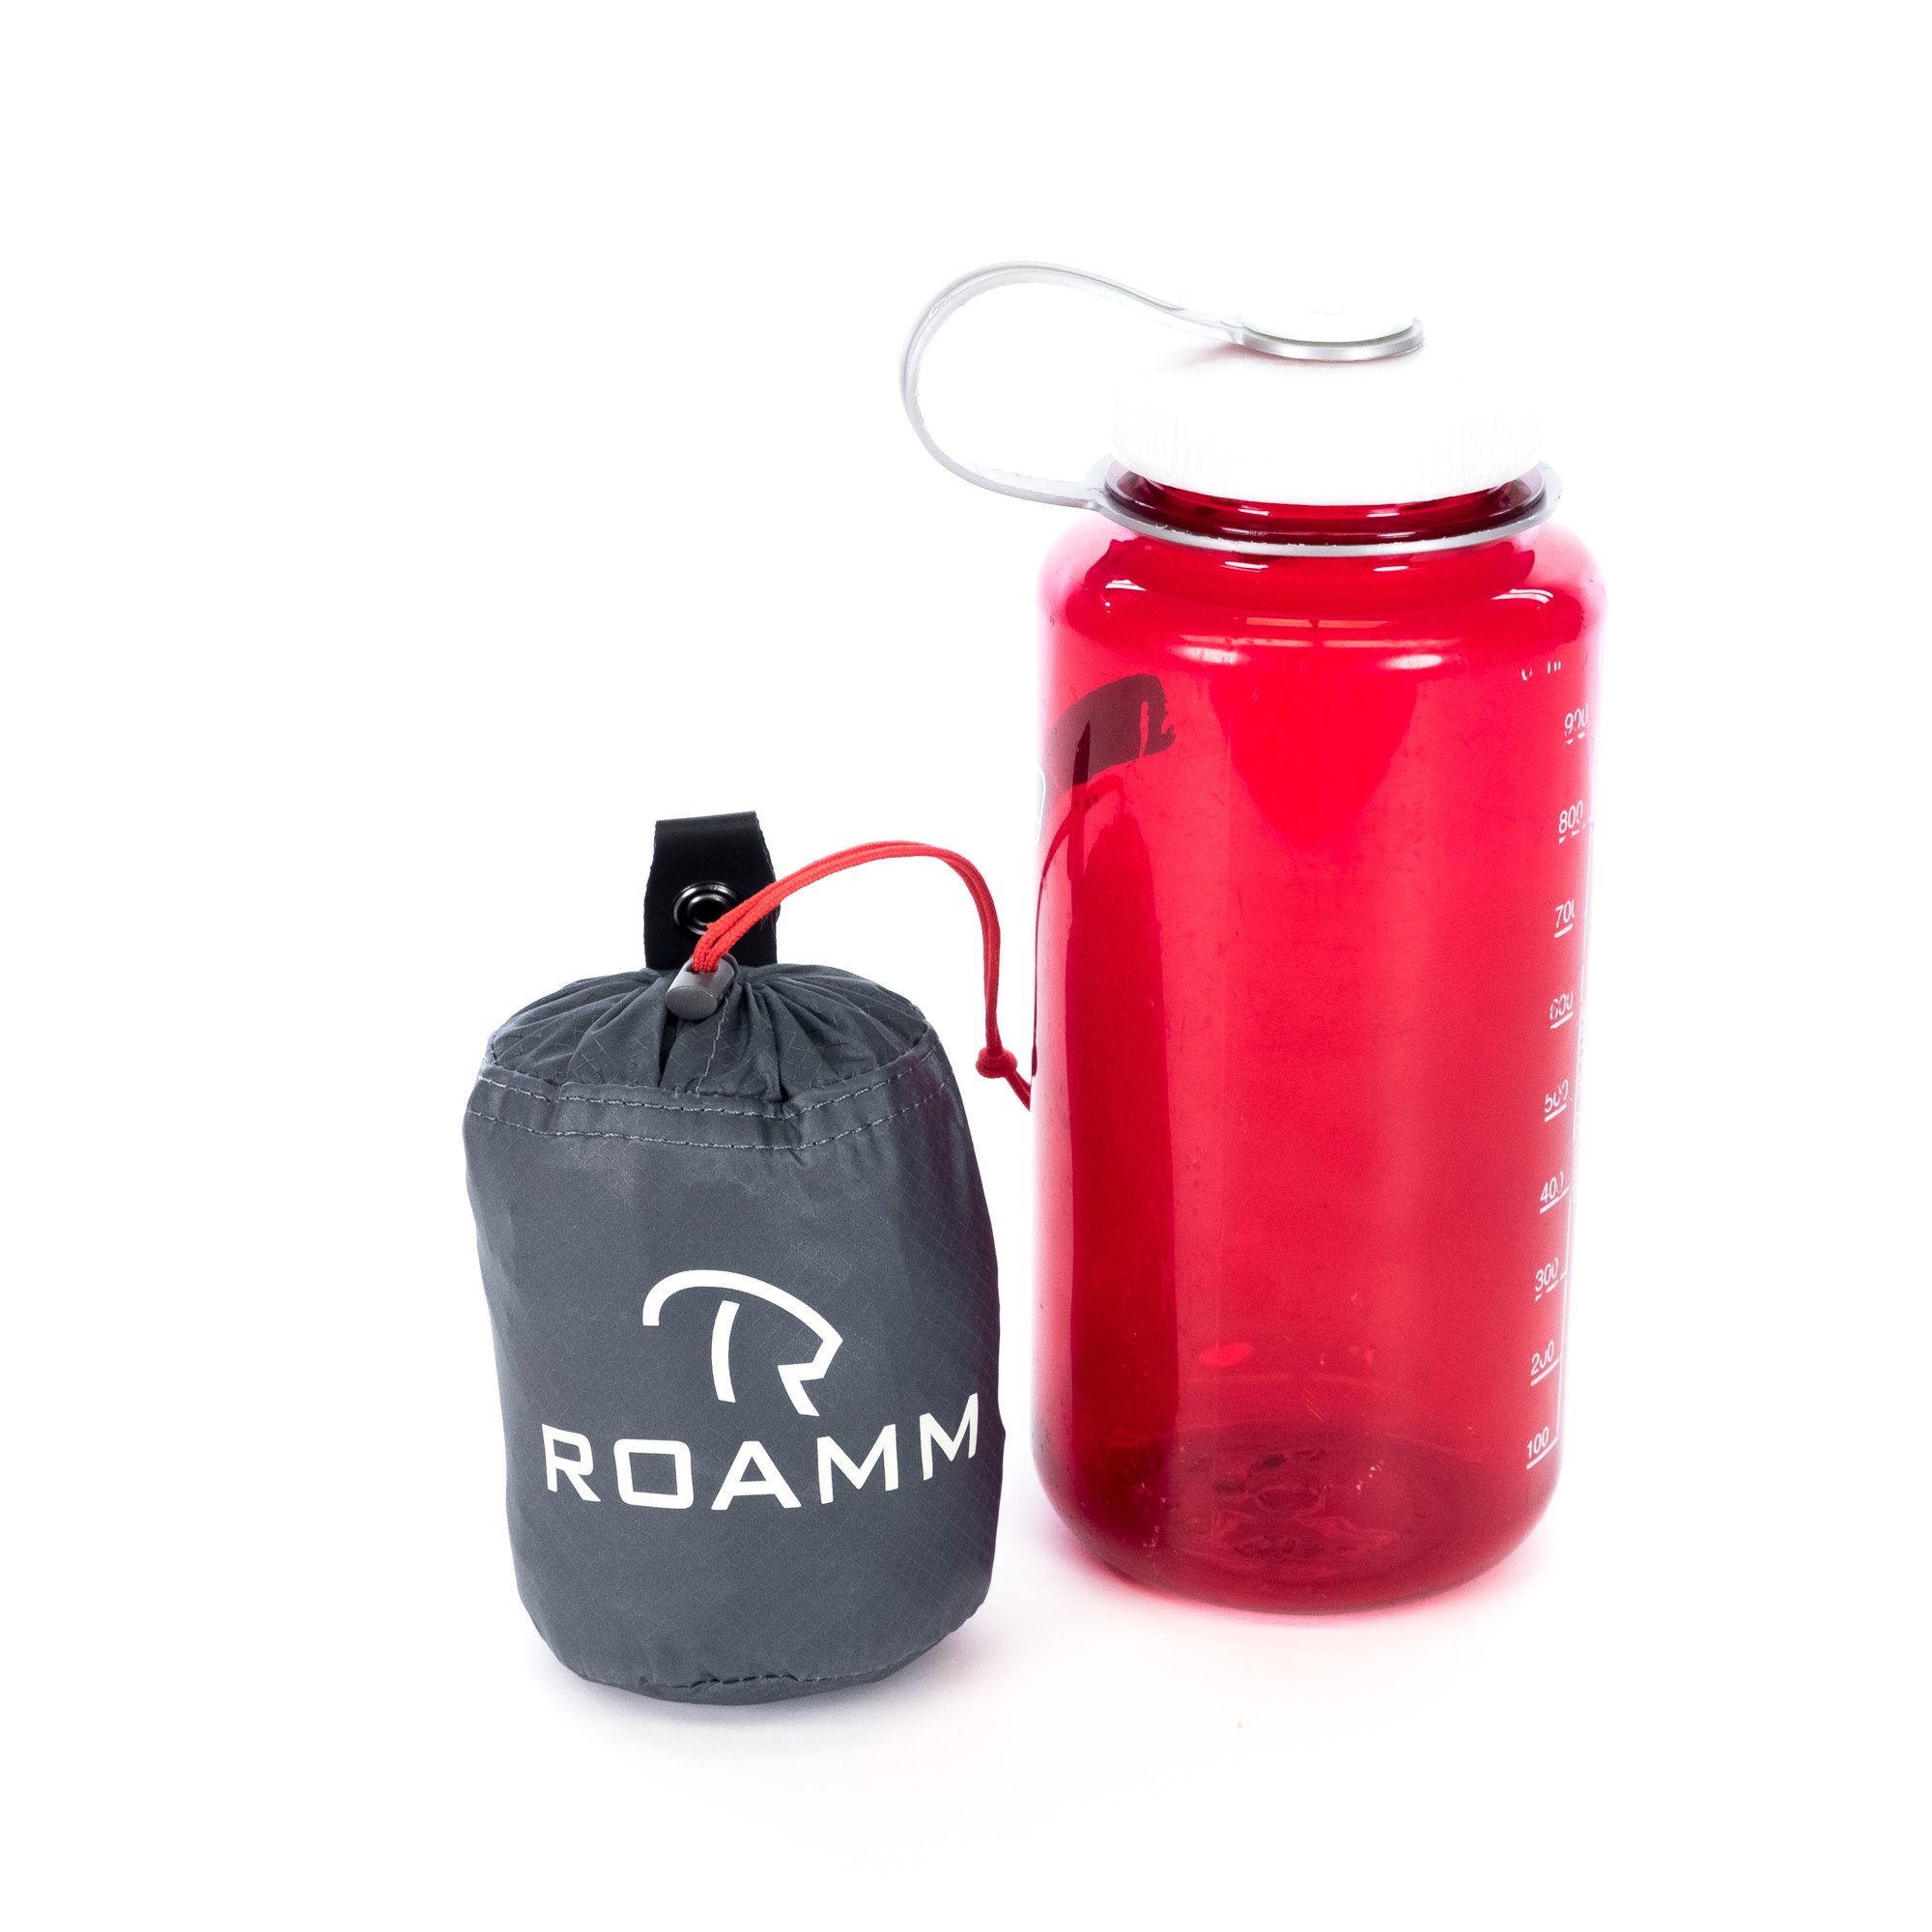 Roamm Cram 20 Ultralight Packable Backpack + Lightweight 3.5oz Bag Perfect for Camping, Hiking, Backpacking, and Outdoors for Men or Women